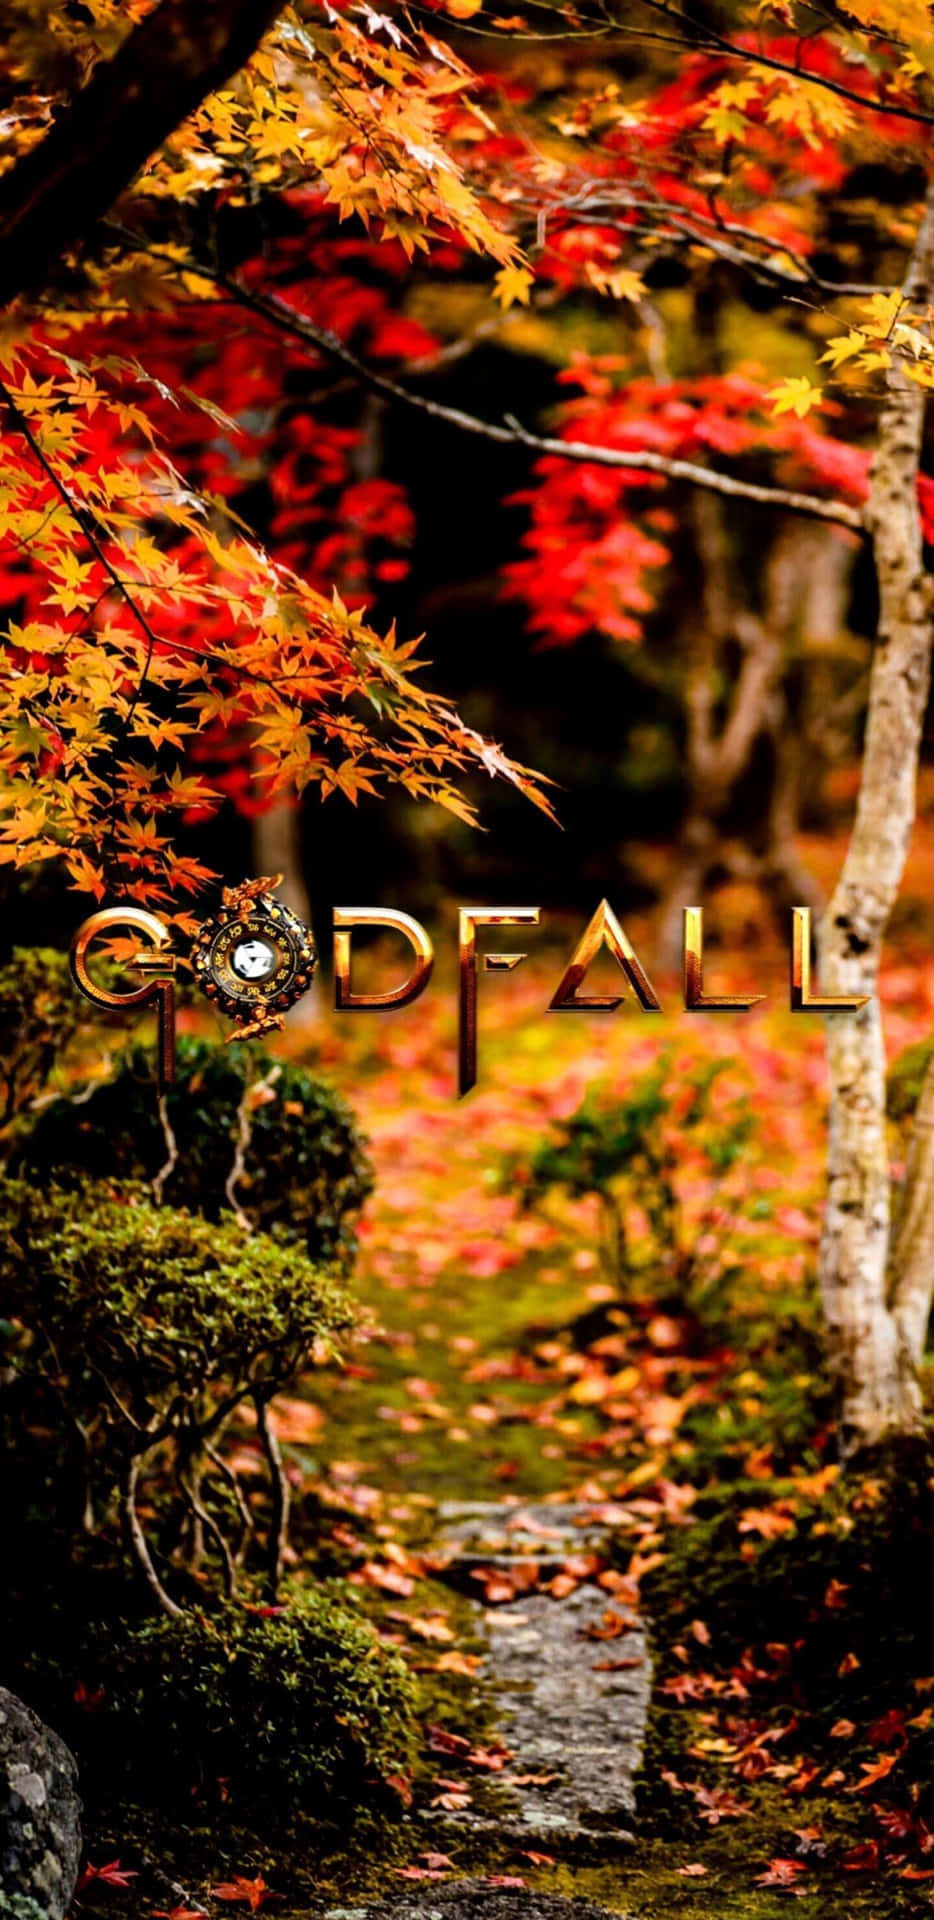 From Pixel to Godfall: A journey through gaming history